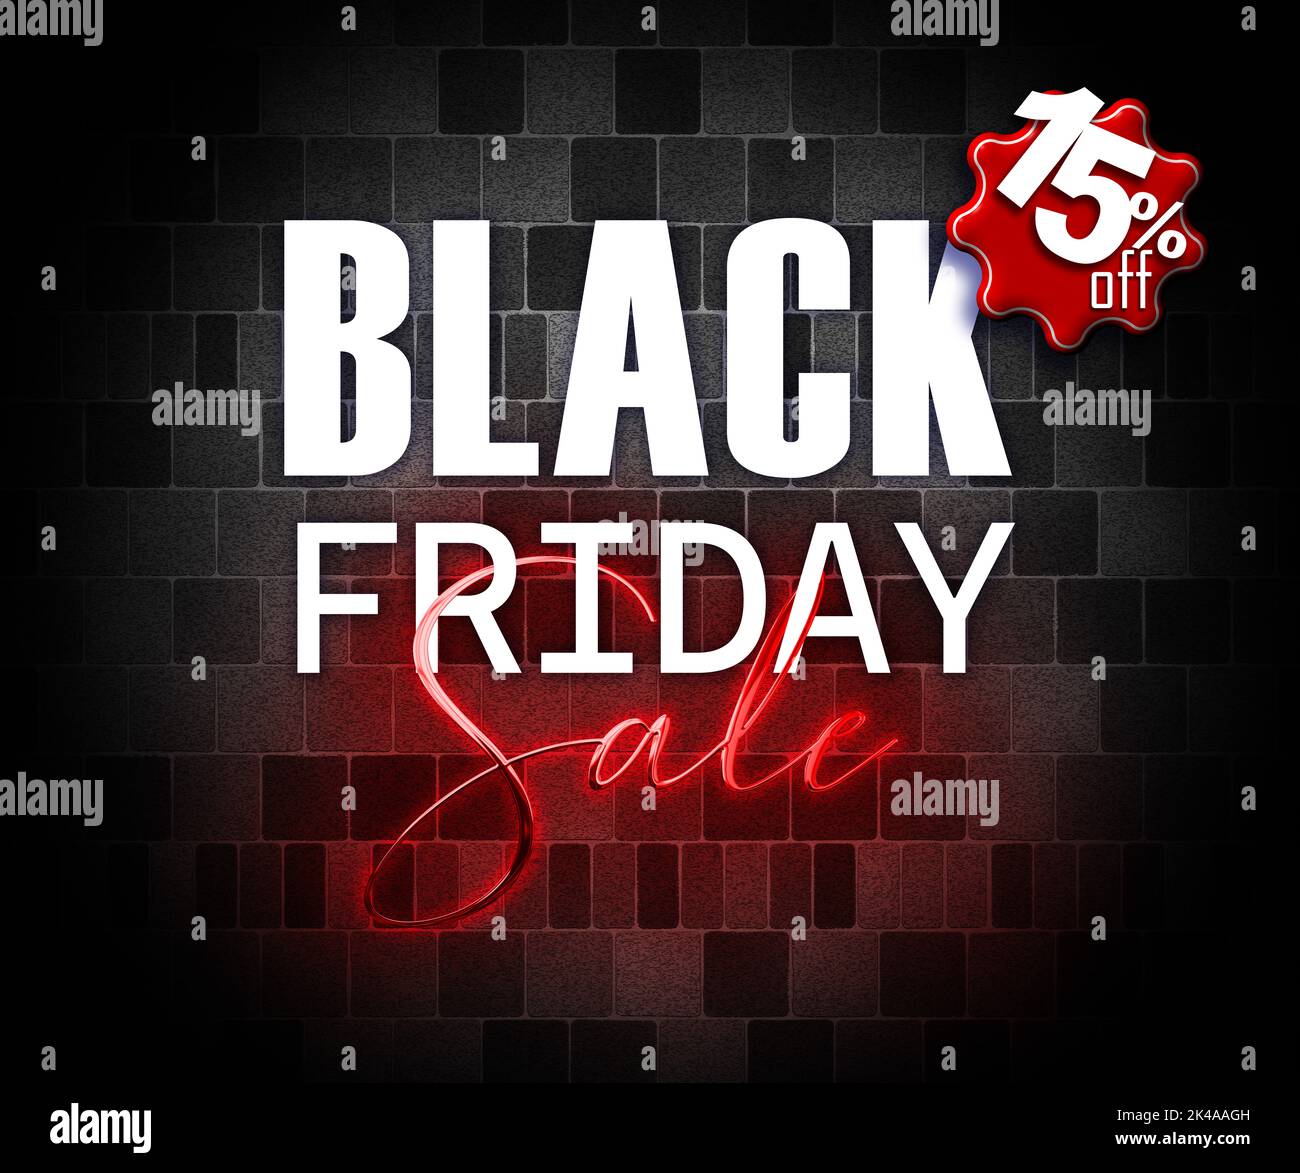 illustration with 3d elements black friday promotion banner 15 percent off sales increase Stock Photo